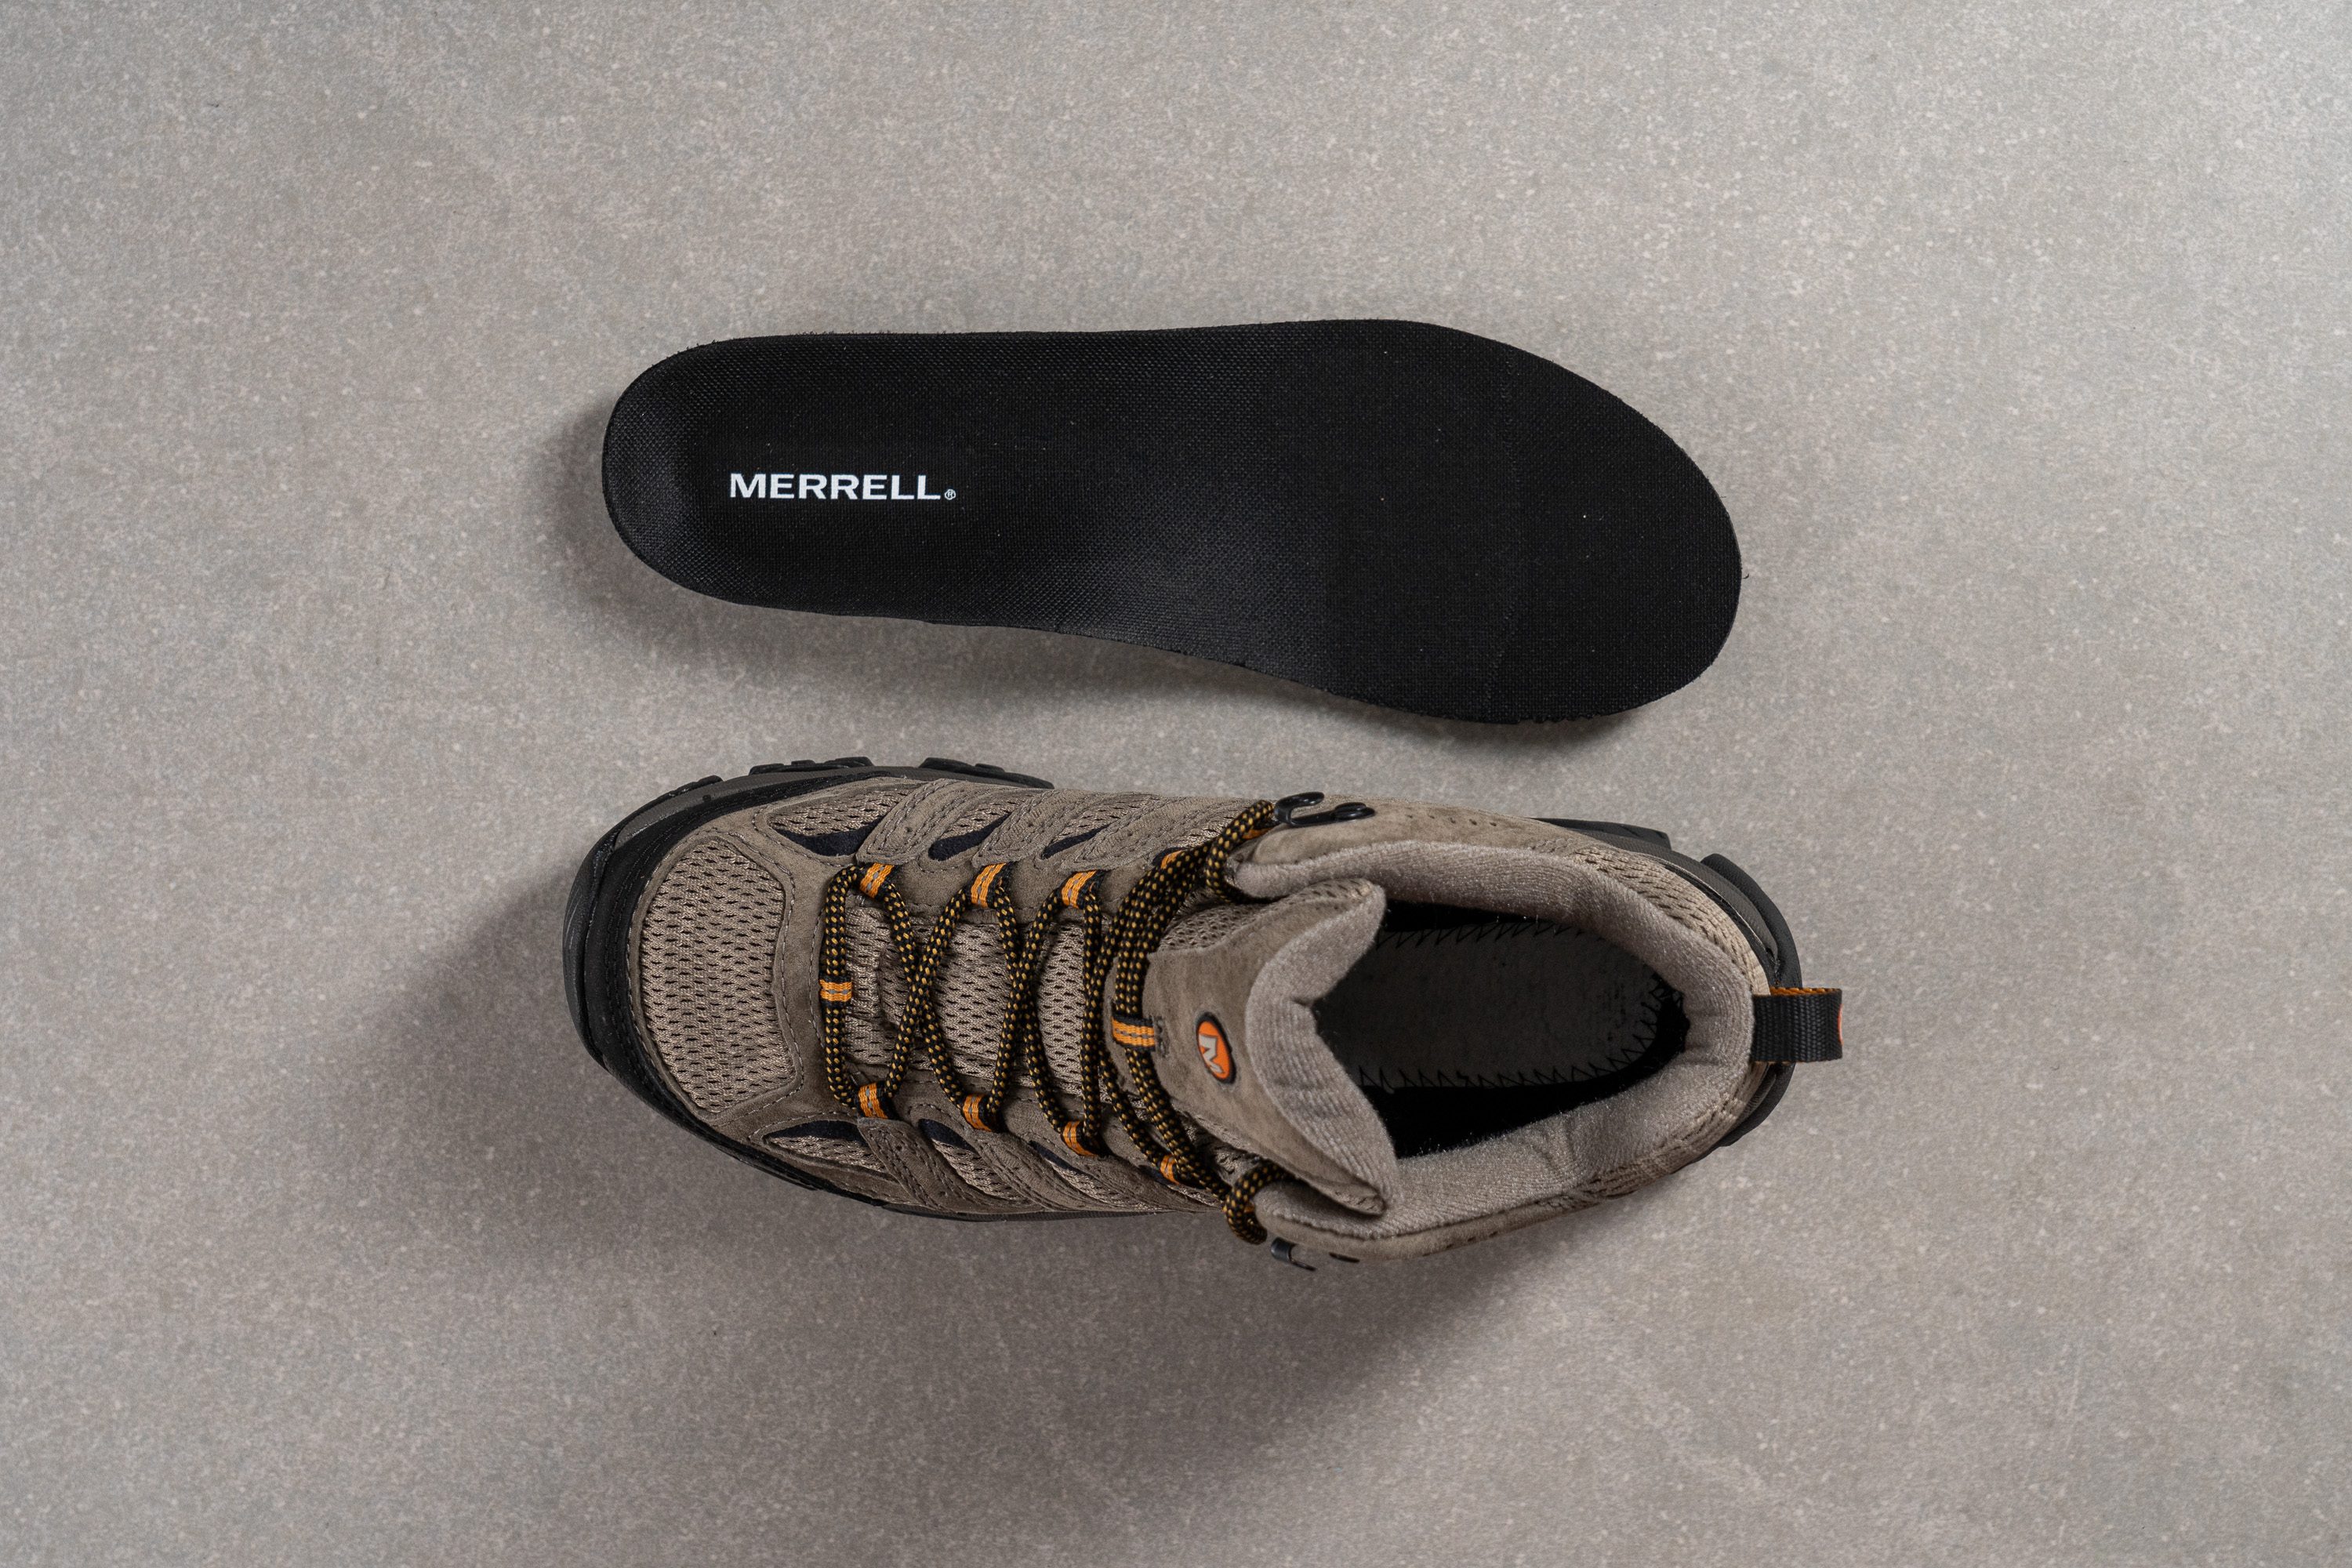 Merrell Who should NOT buy Removable insole